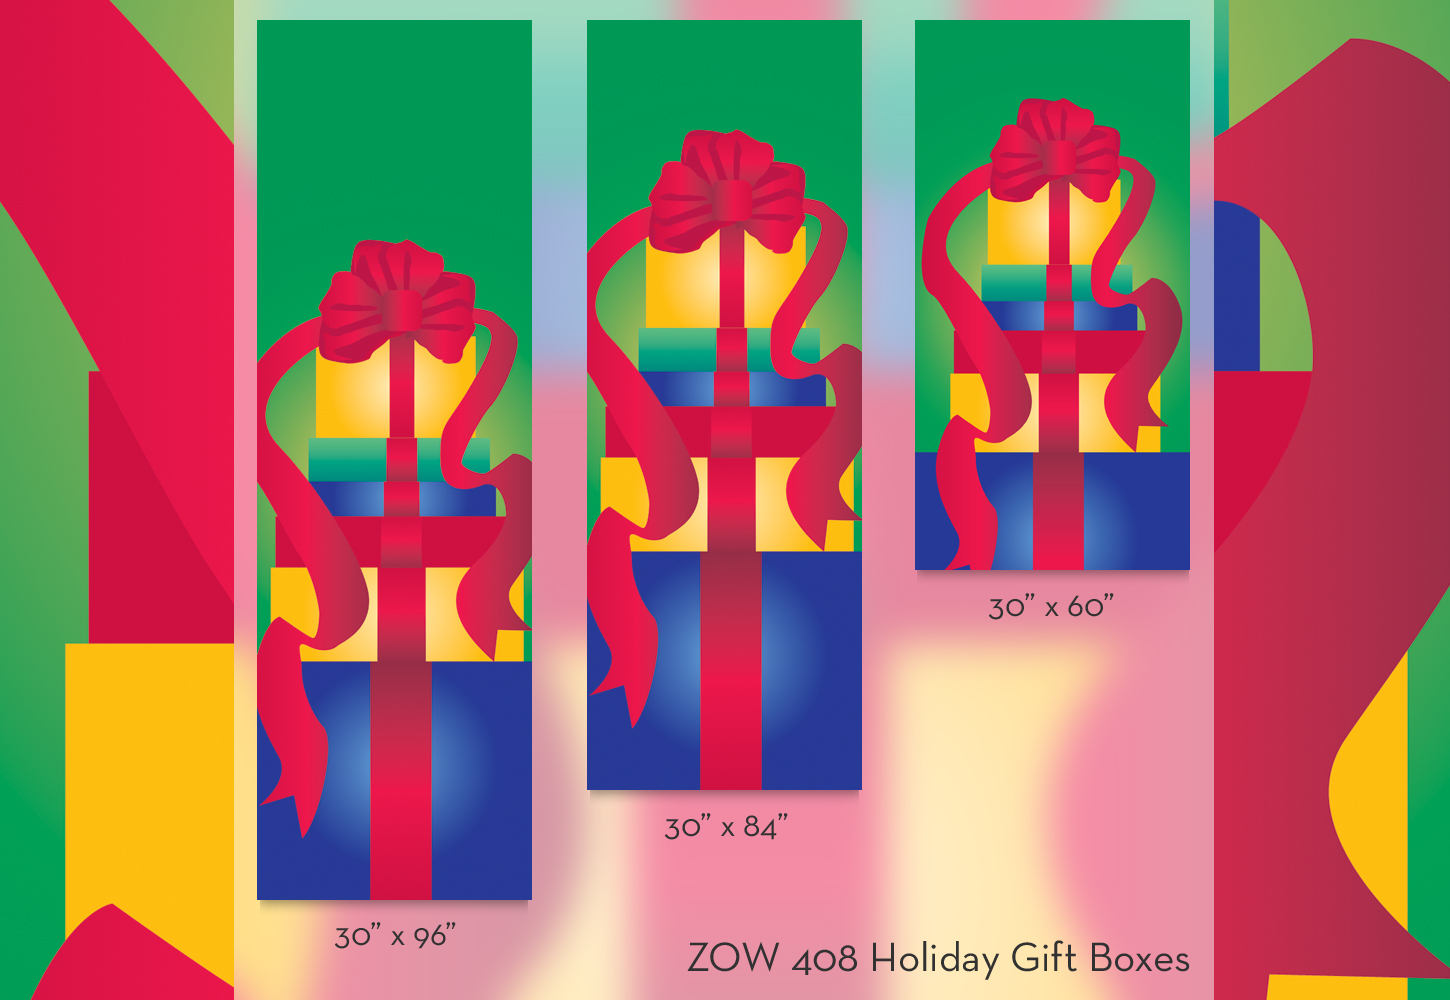 ZOW 408 Holiday Gift Boxes